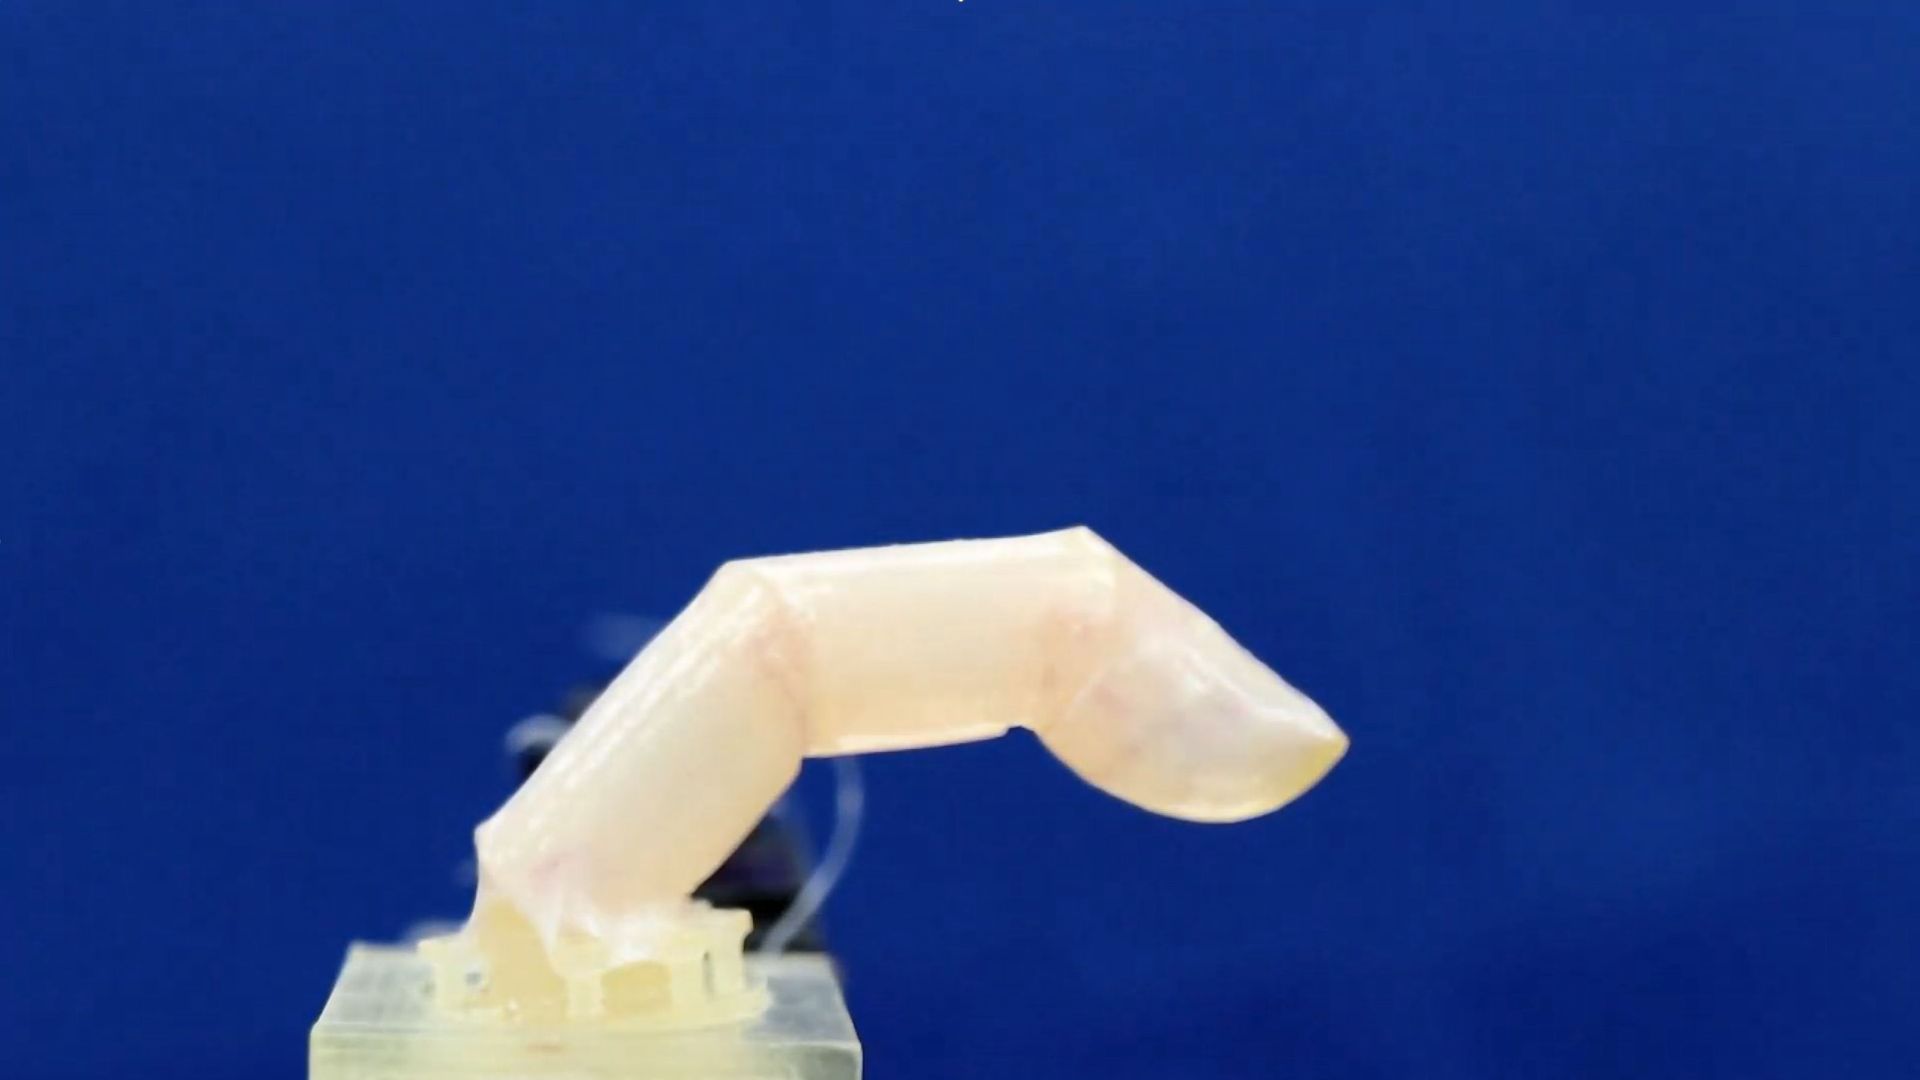 A bending robotic finger covered with living skin